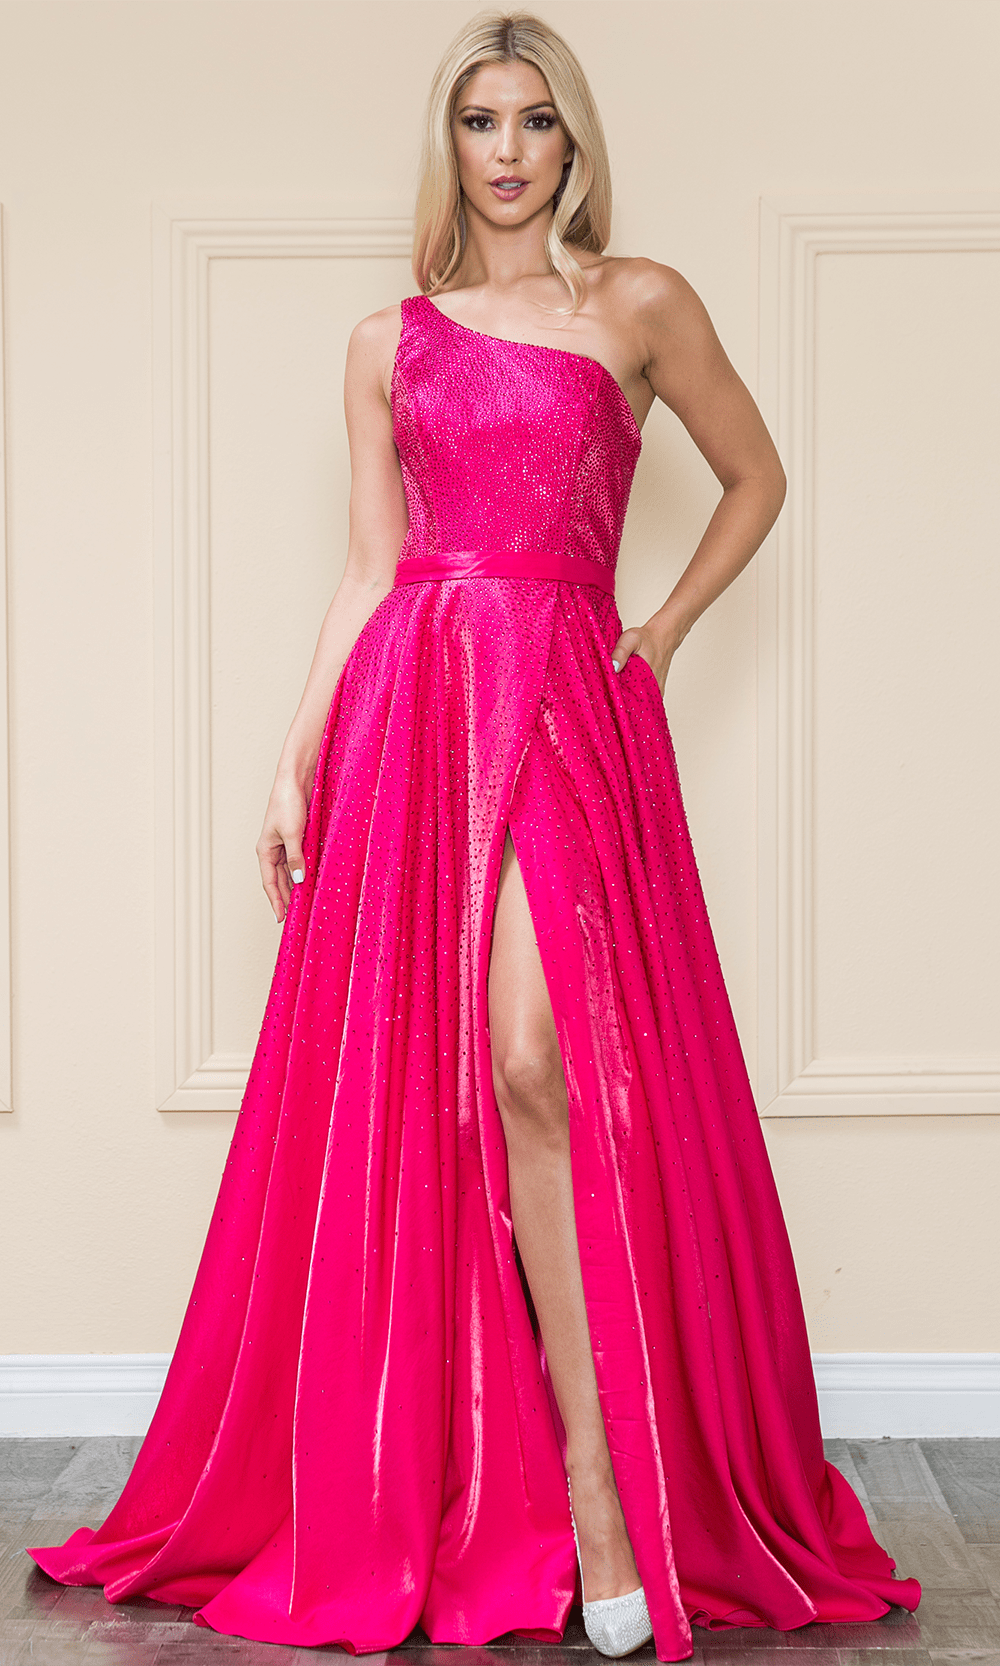 Image of Poly USA 8920 - Beaded Asymmetrical Neck Long Gown